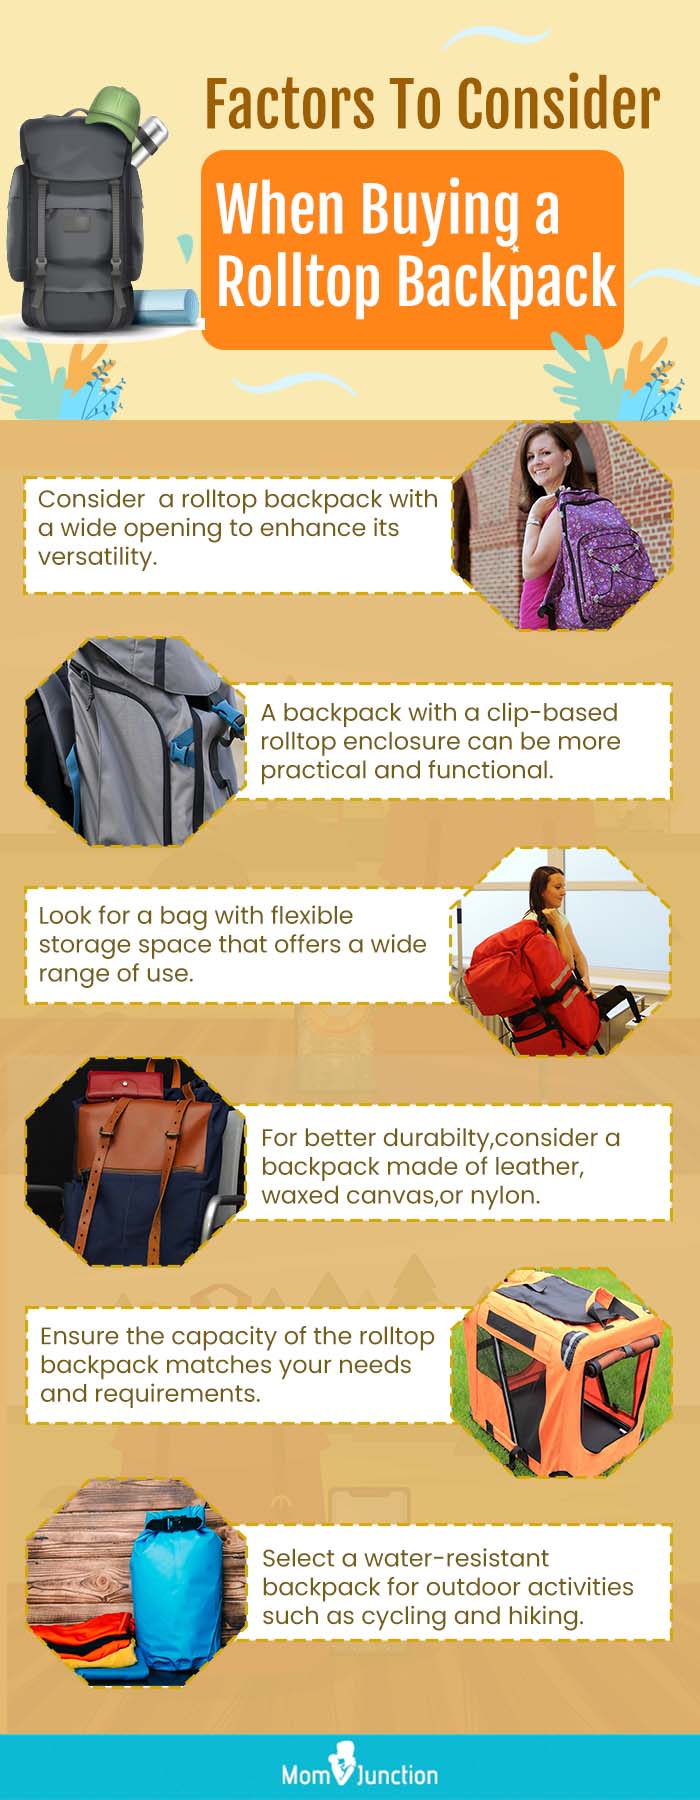 Factors To Consider When Buying A Rolltop Backpack (infographic)